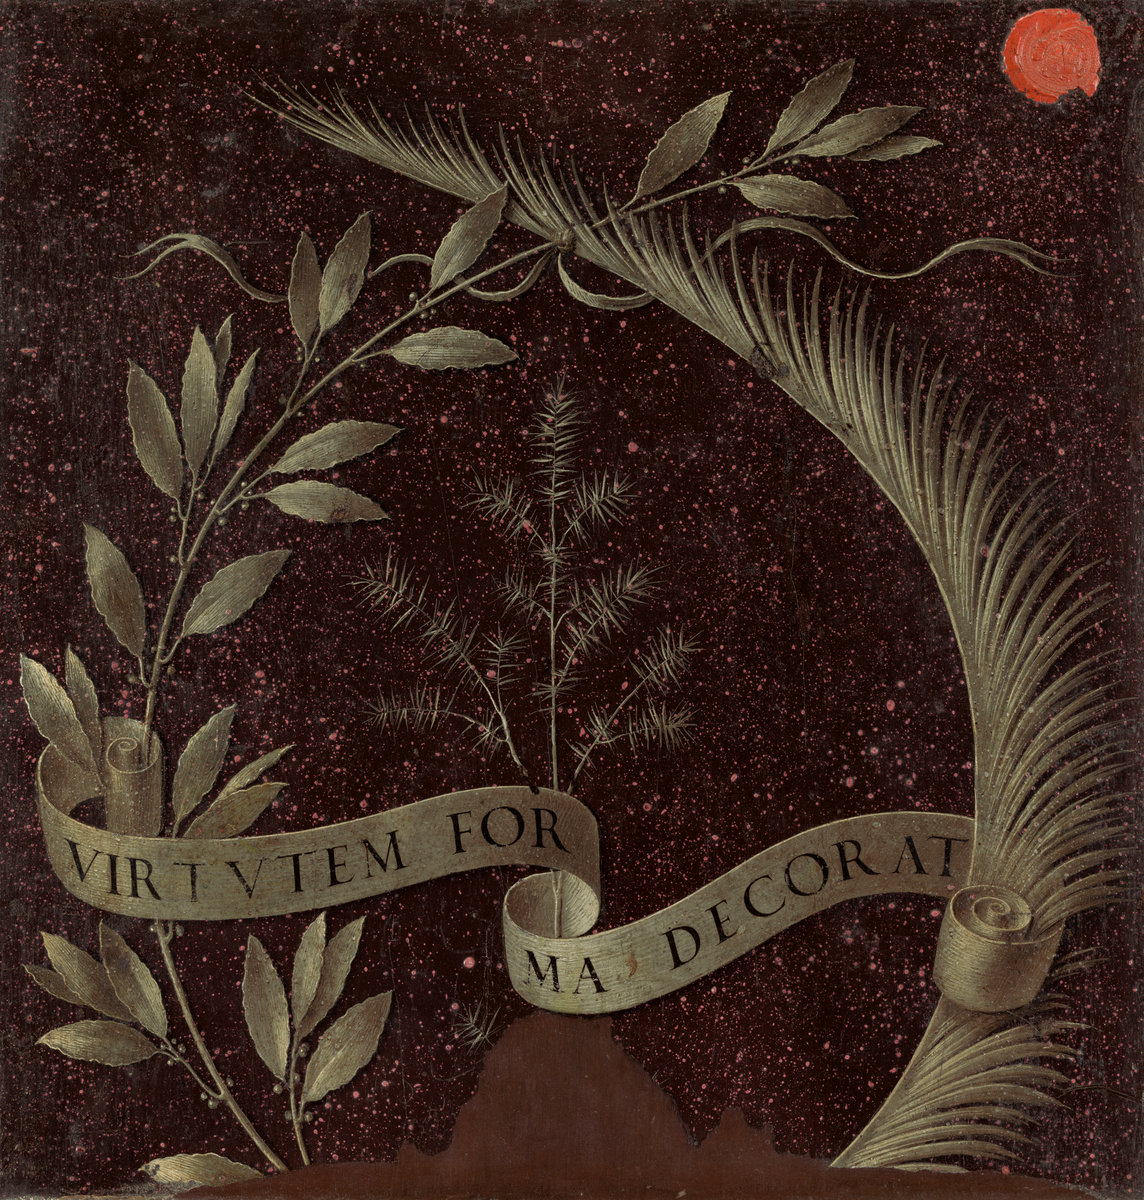 Wreath of Laurel, Palm, and Juniper with a Scroll inscribed Virtutem Forma Decorat